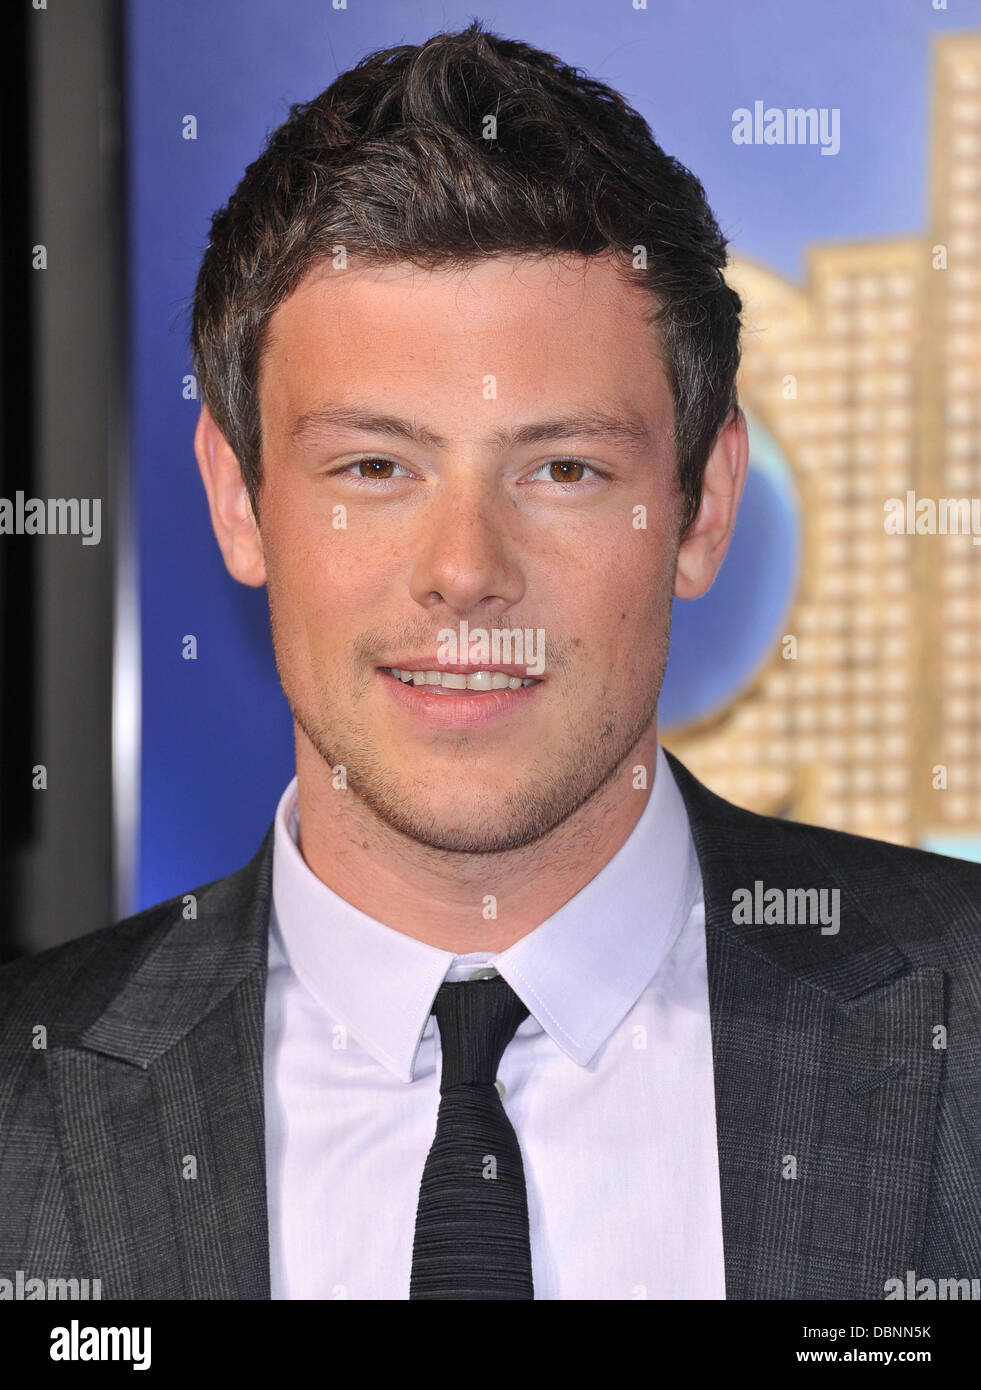 Cory Monteith The world premiere of 'Glee: The 3D Concert Movie' held at the Regency Village Theatre - Arrivals Los Angeles, California - 06.08.11 Stock Photo